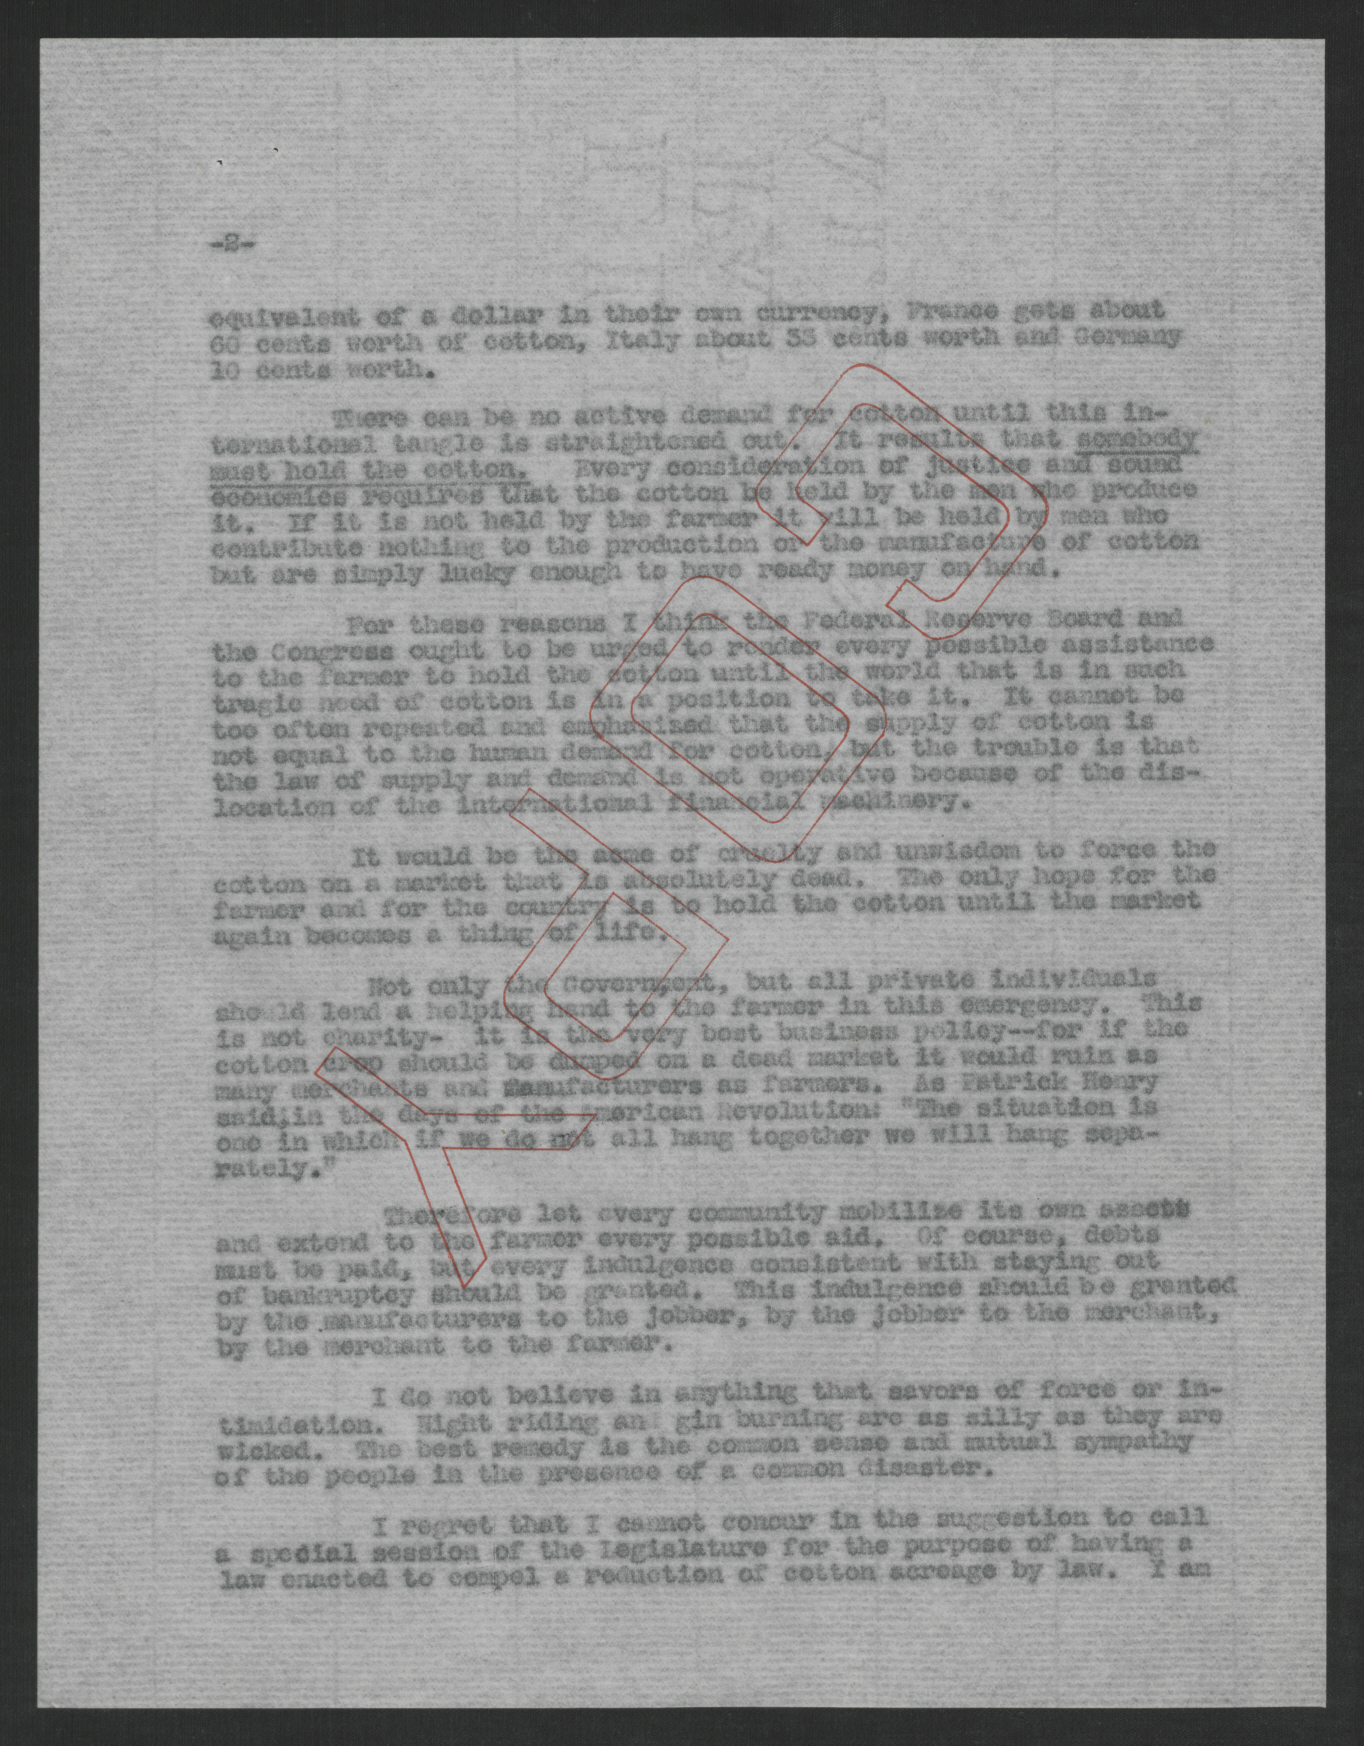 Letter from Thomas W. Bickett to John S. Wannamaker, November 8, 1920, page 2